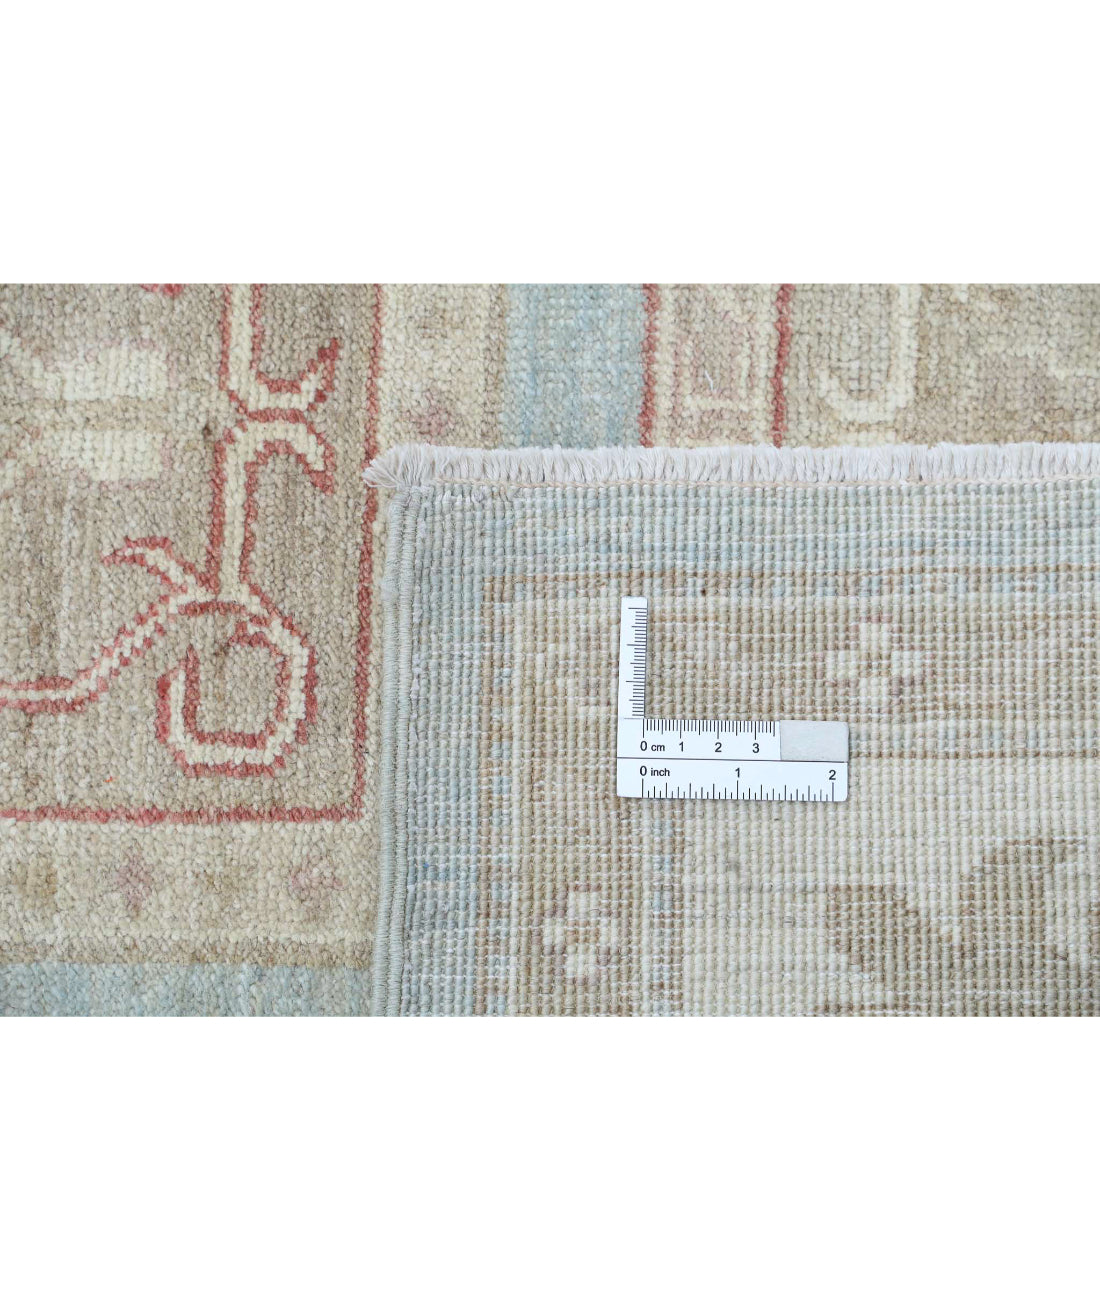 Serenity 6'8'' X 9'8'' Hand-Knotted Wool Rug 6'8'' x 9'8'' (200 X 290) / Blue / Ivory